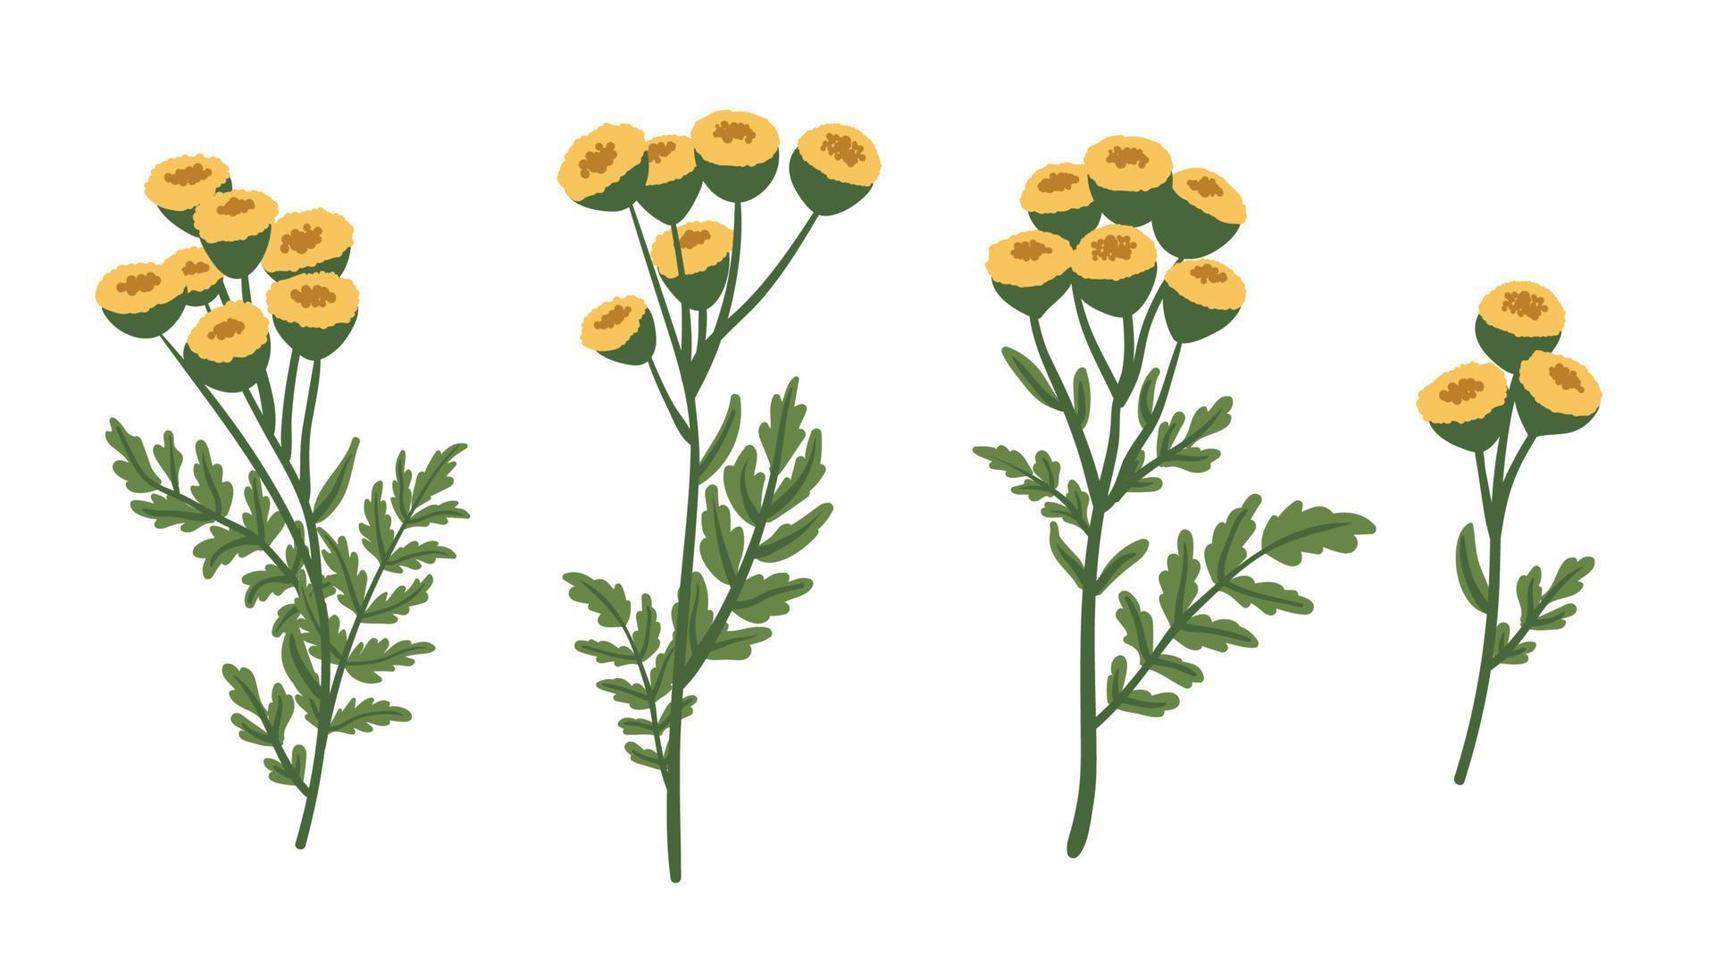 Wild tansy flowers set. Tanacetum vulgare. Flowering herbaceous medicinal plant, yellow herbs and flowers. Flat vector illustration isolated on white background